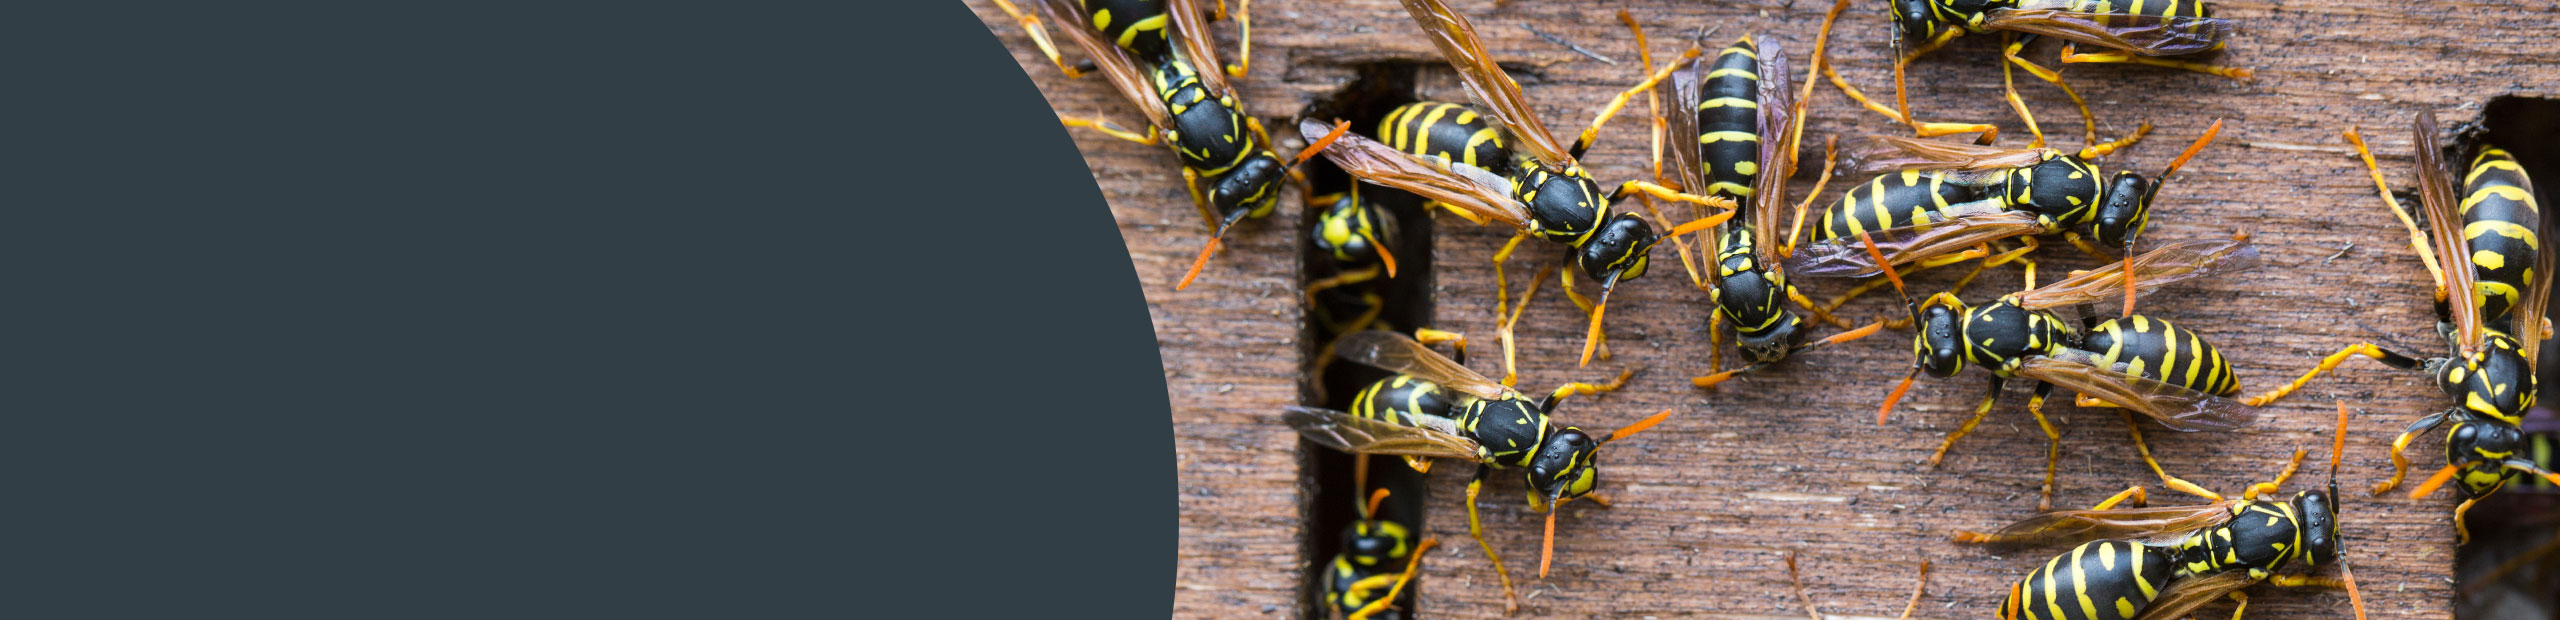 Insect Control - Richmond Upon Thames